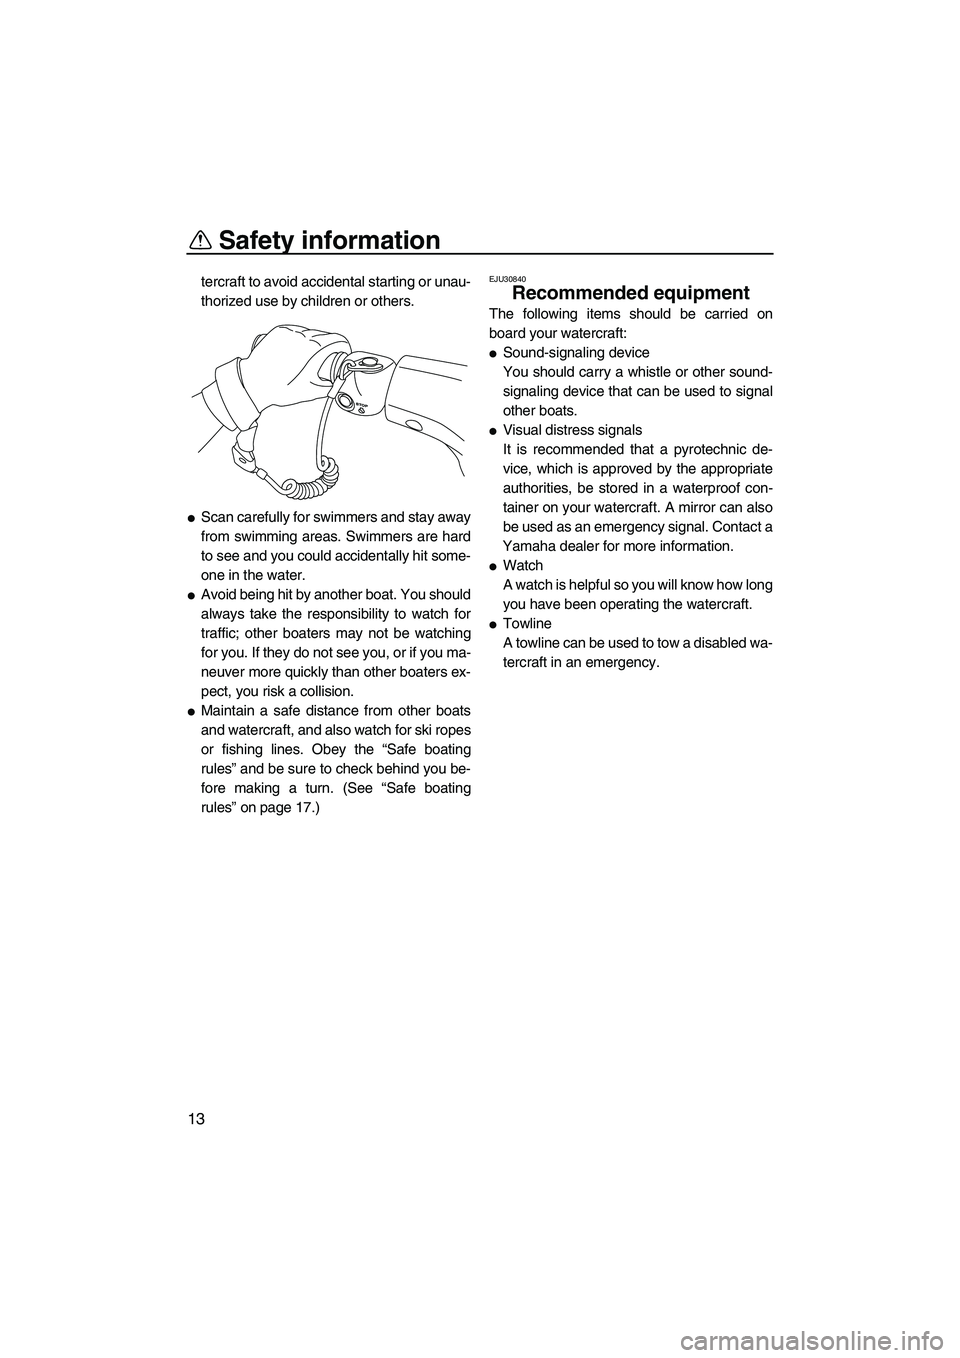 YAMAHA VX SPORT 2010 User Guide Safety information
13
tercraft to avoid accidental starting or unau-
thorized use by children or others.
Scan carefully for swimmers and stay away
from swimming areas. Swimmers are hard
to see and yo